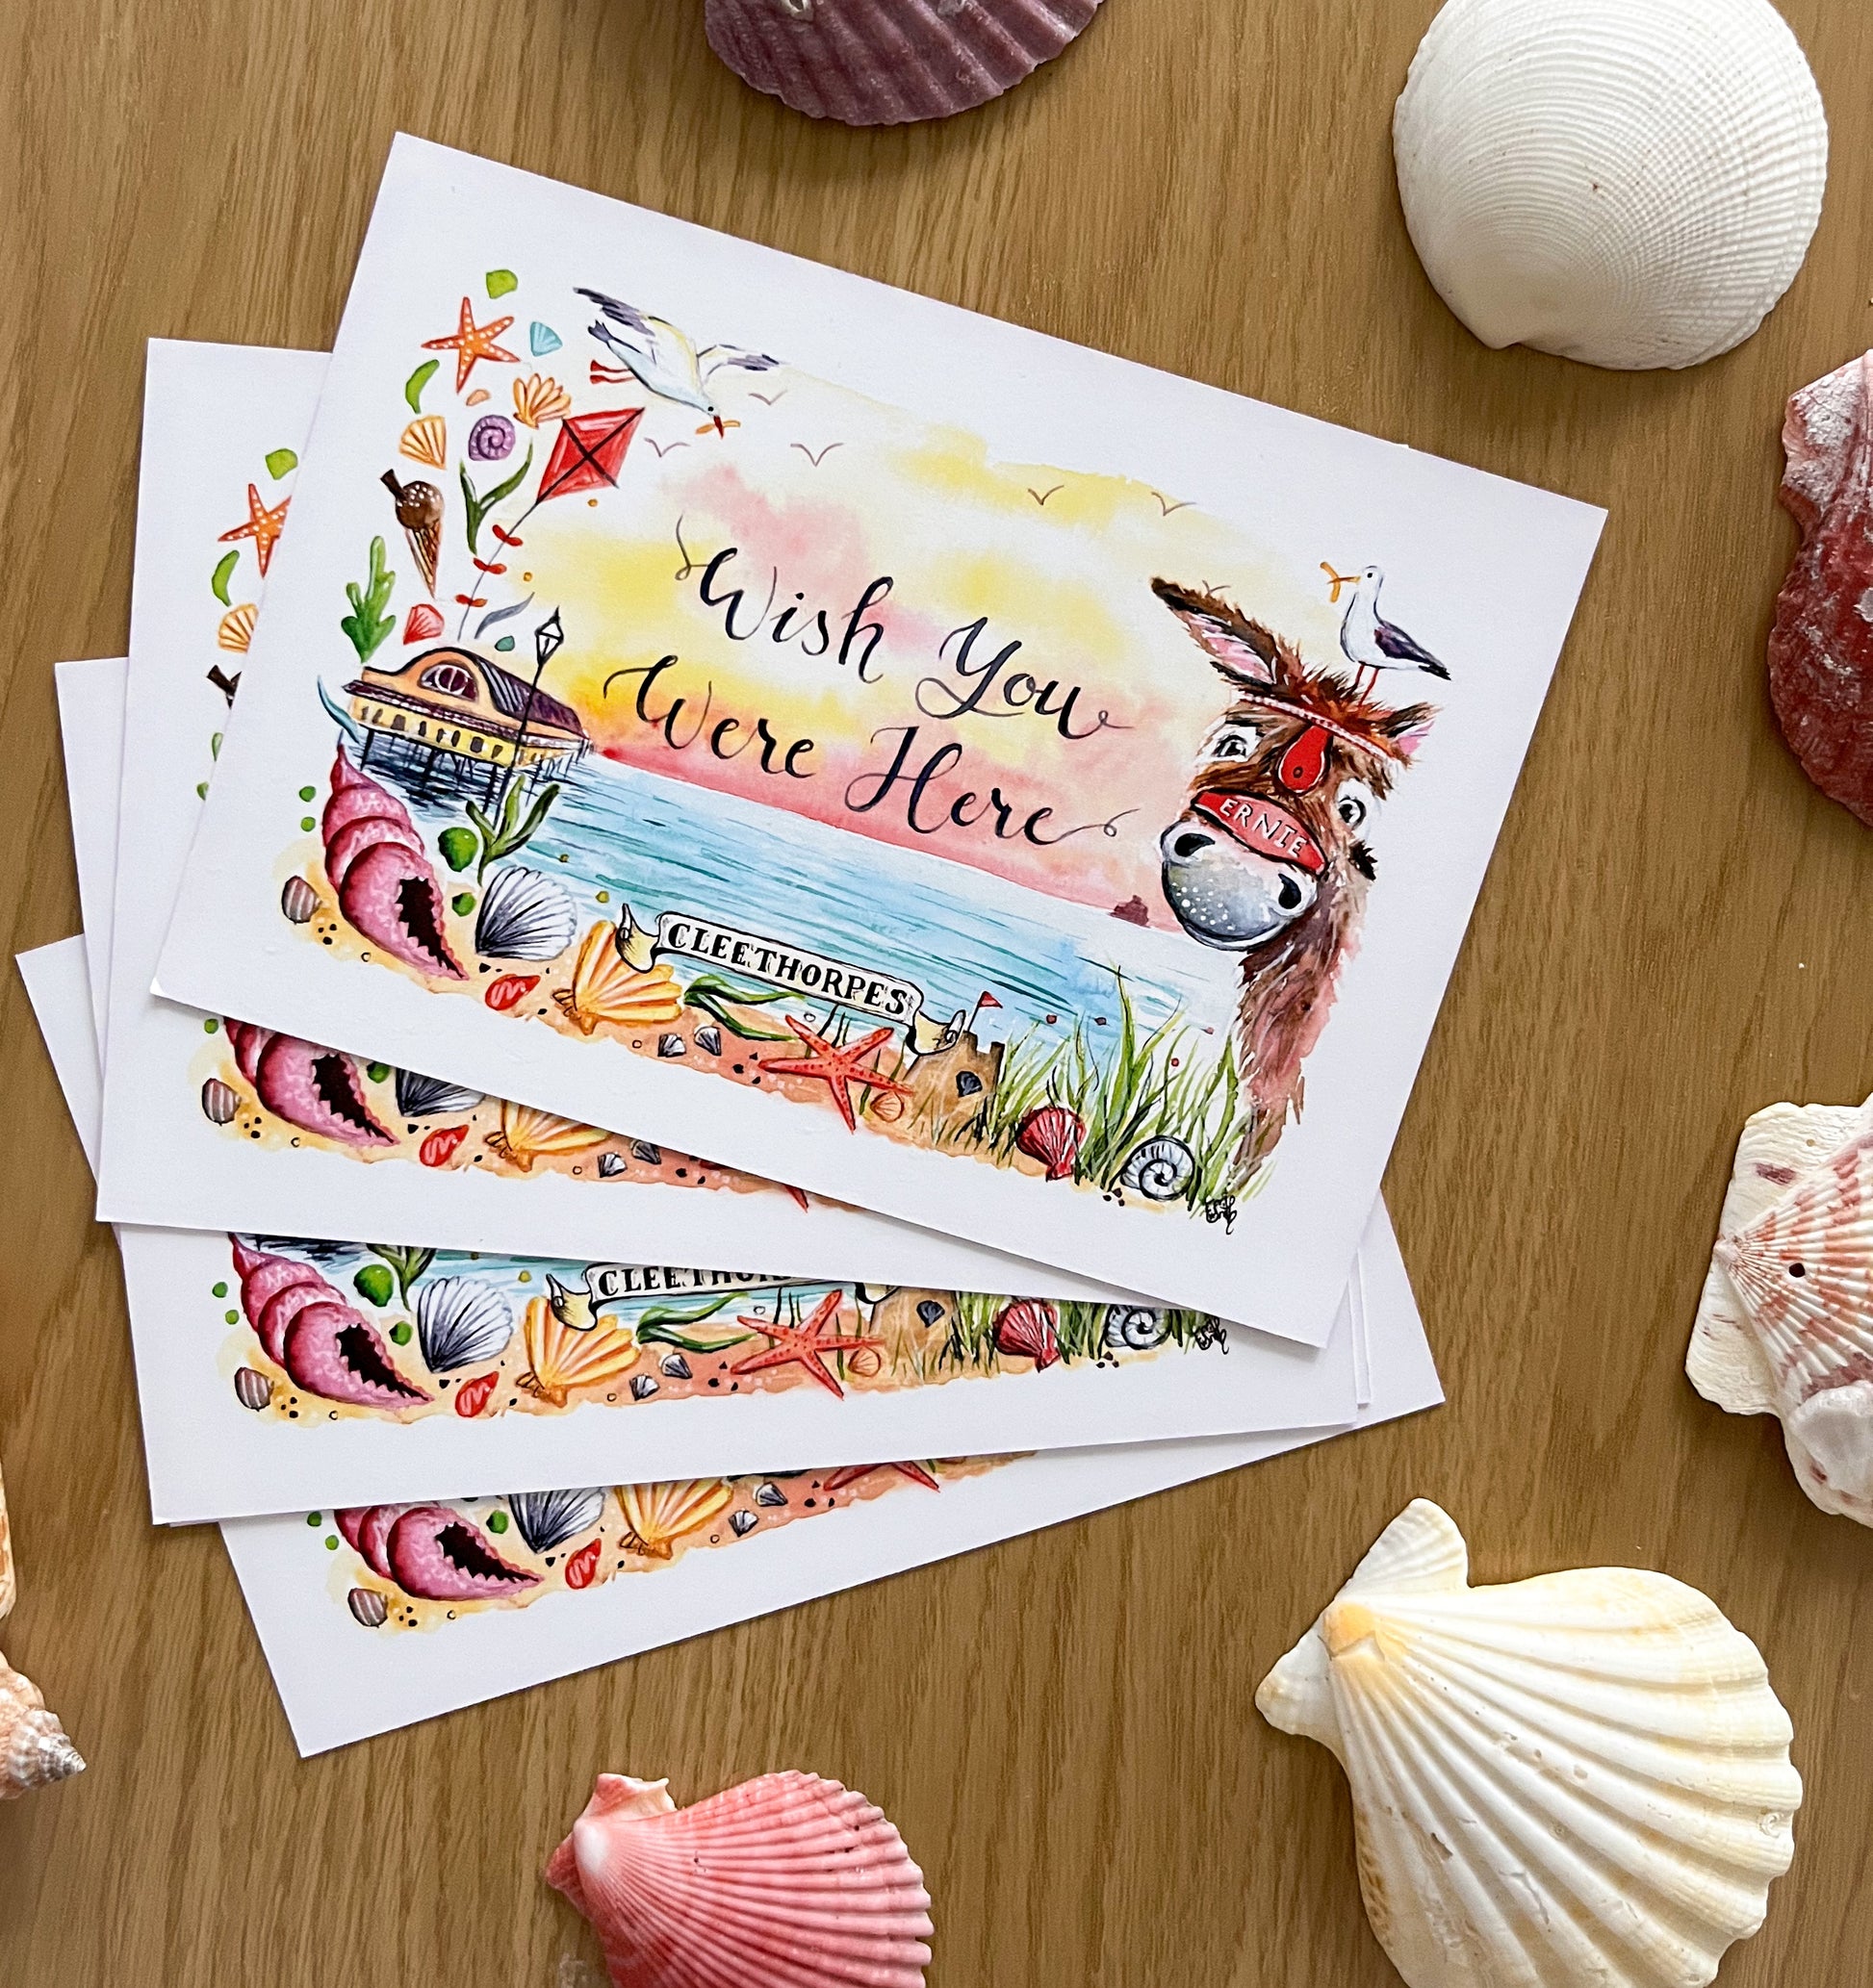 Cleethorpes postcards designed by Eve Leoni Art for local author, Tracy Baines. The design features the Cleethorpes pier and a donkey along with the writing, 'wish you were here'.